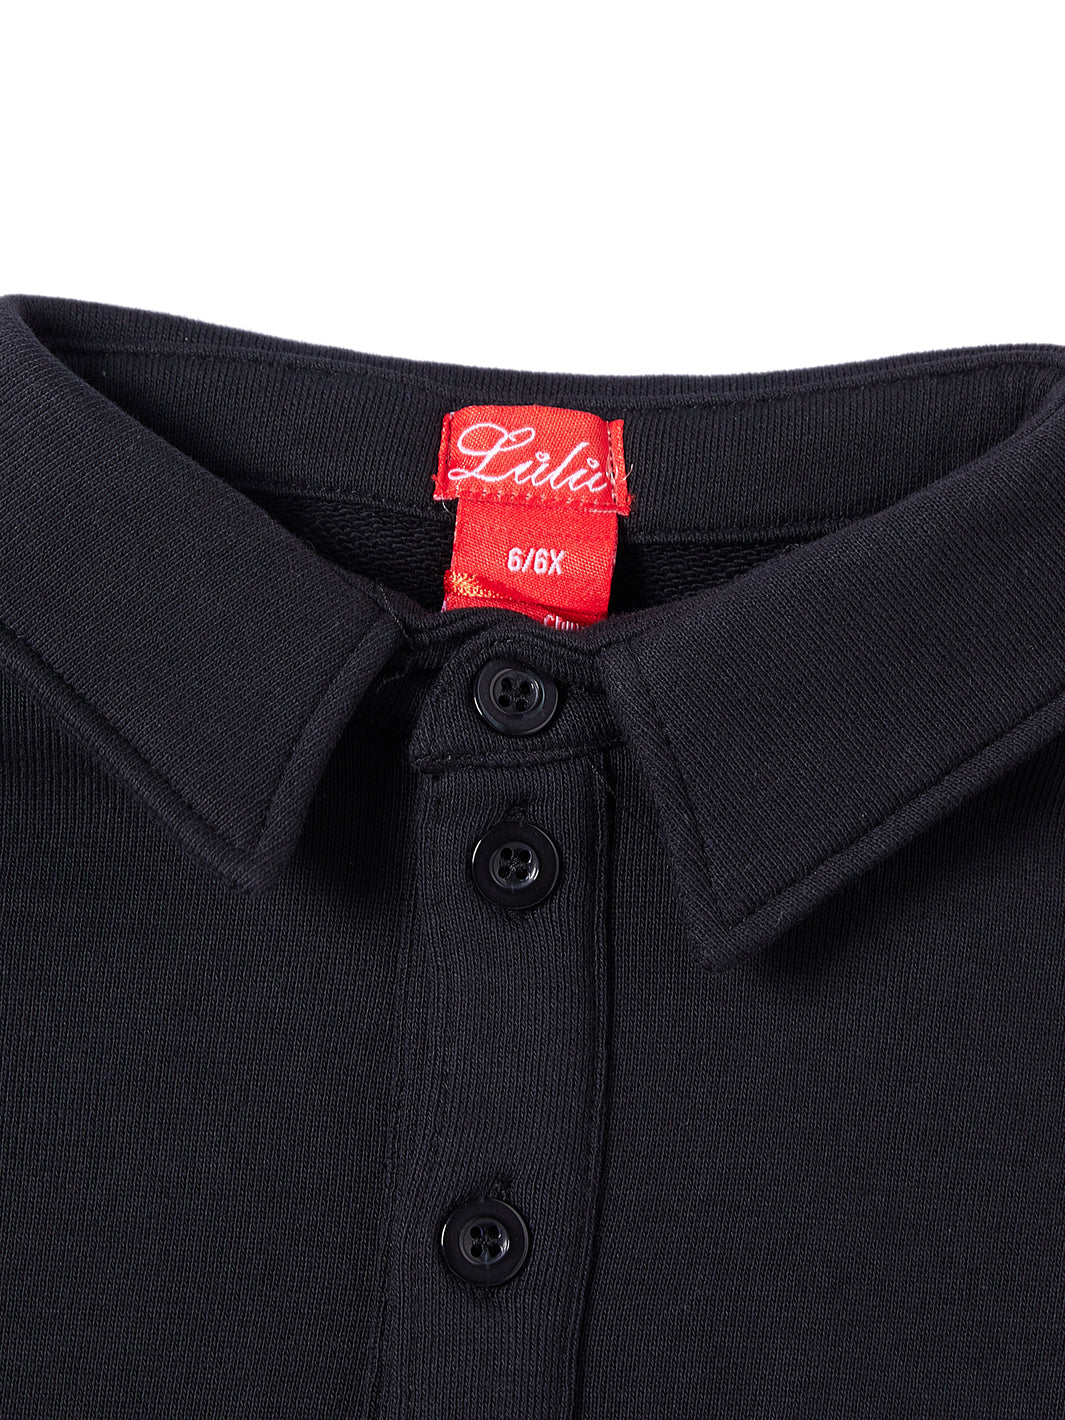 Contrast Inserts Polo - Black/Royal Blue